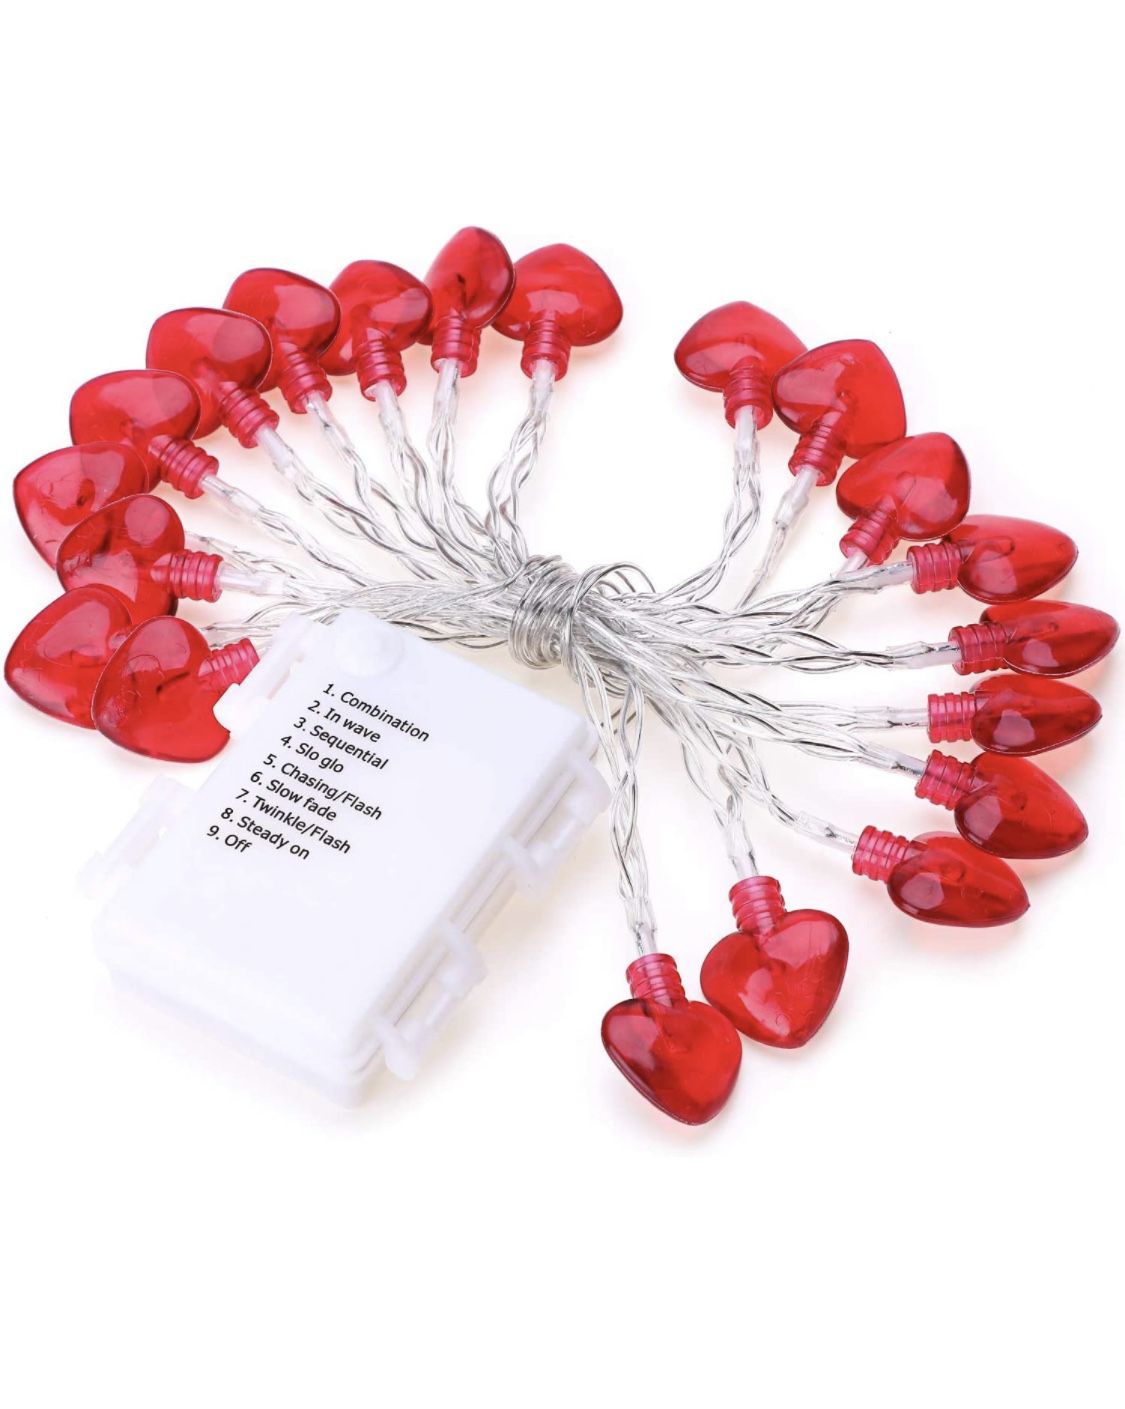 Valentine’s Day String Lights Decorations - 8.2ft/2.5m 20 Red Heart-Shaped 8 Flash Modes Battery Operated Twinkle Fairy Indoor/Outdoor Decorative Ligh